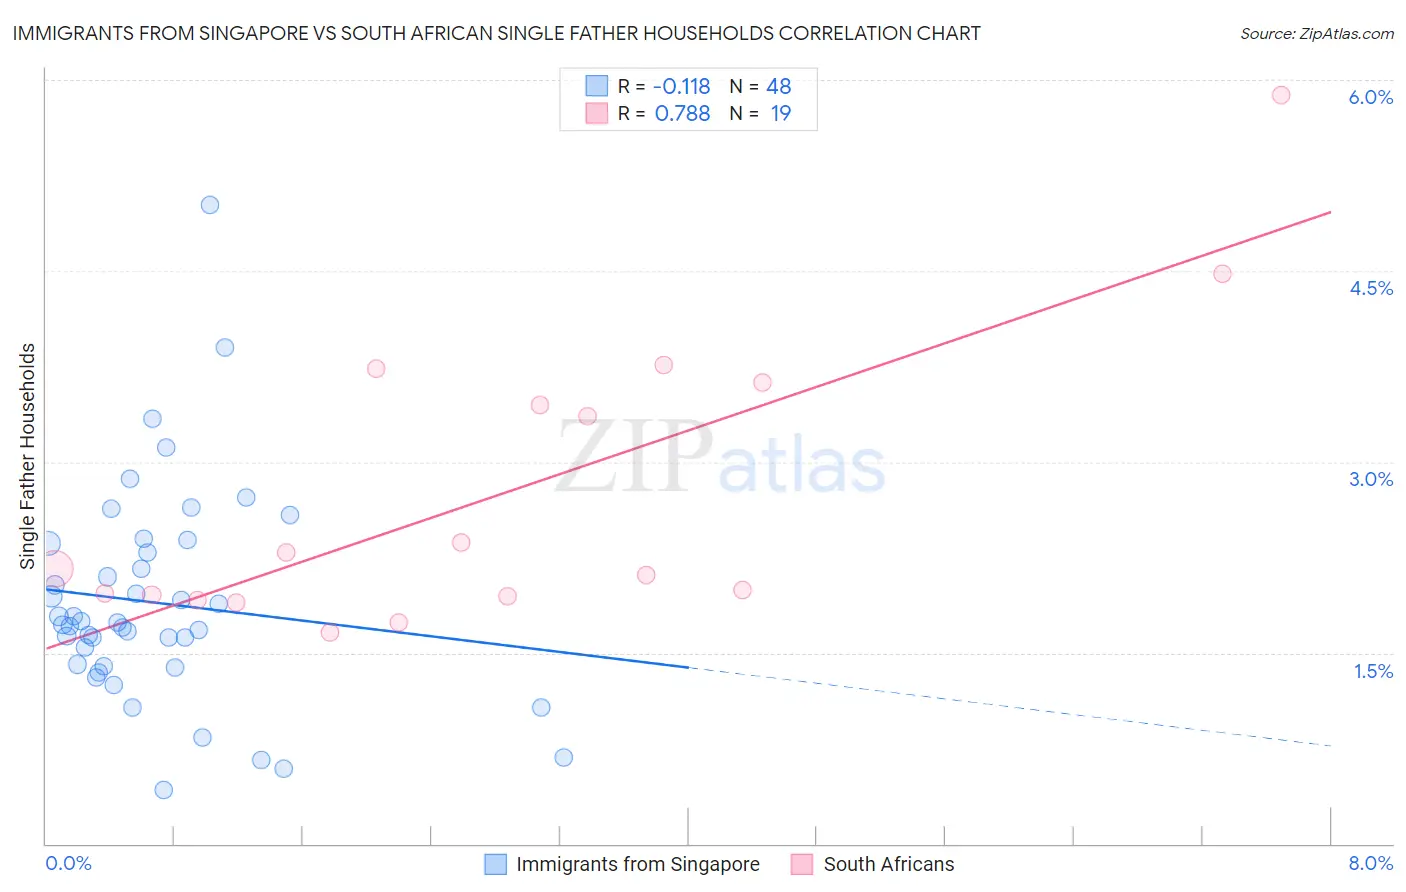 Immigrants from Singapore vs South African Single Father Households